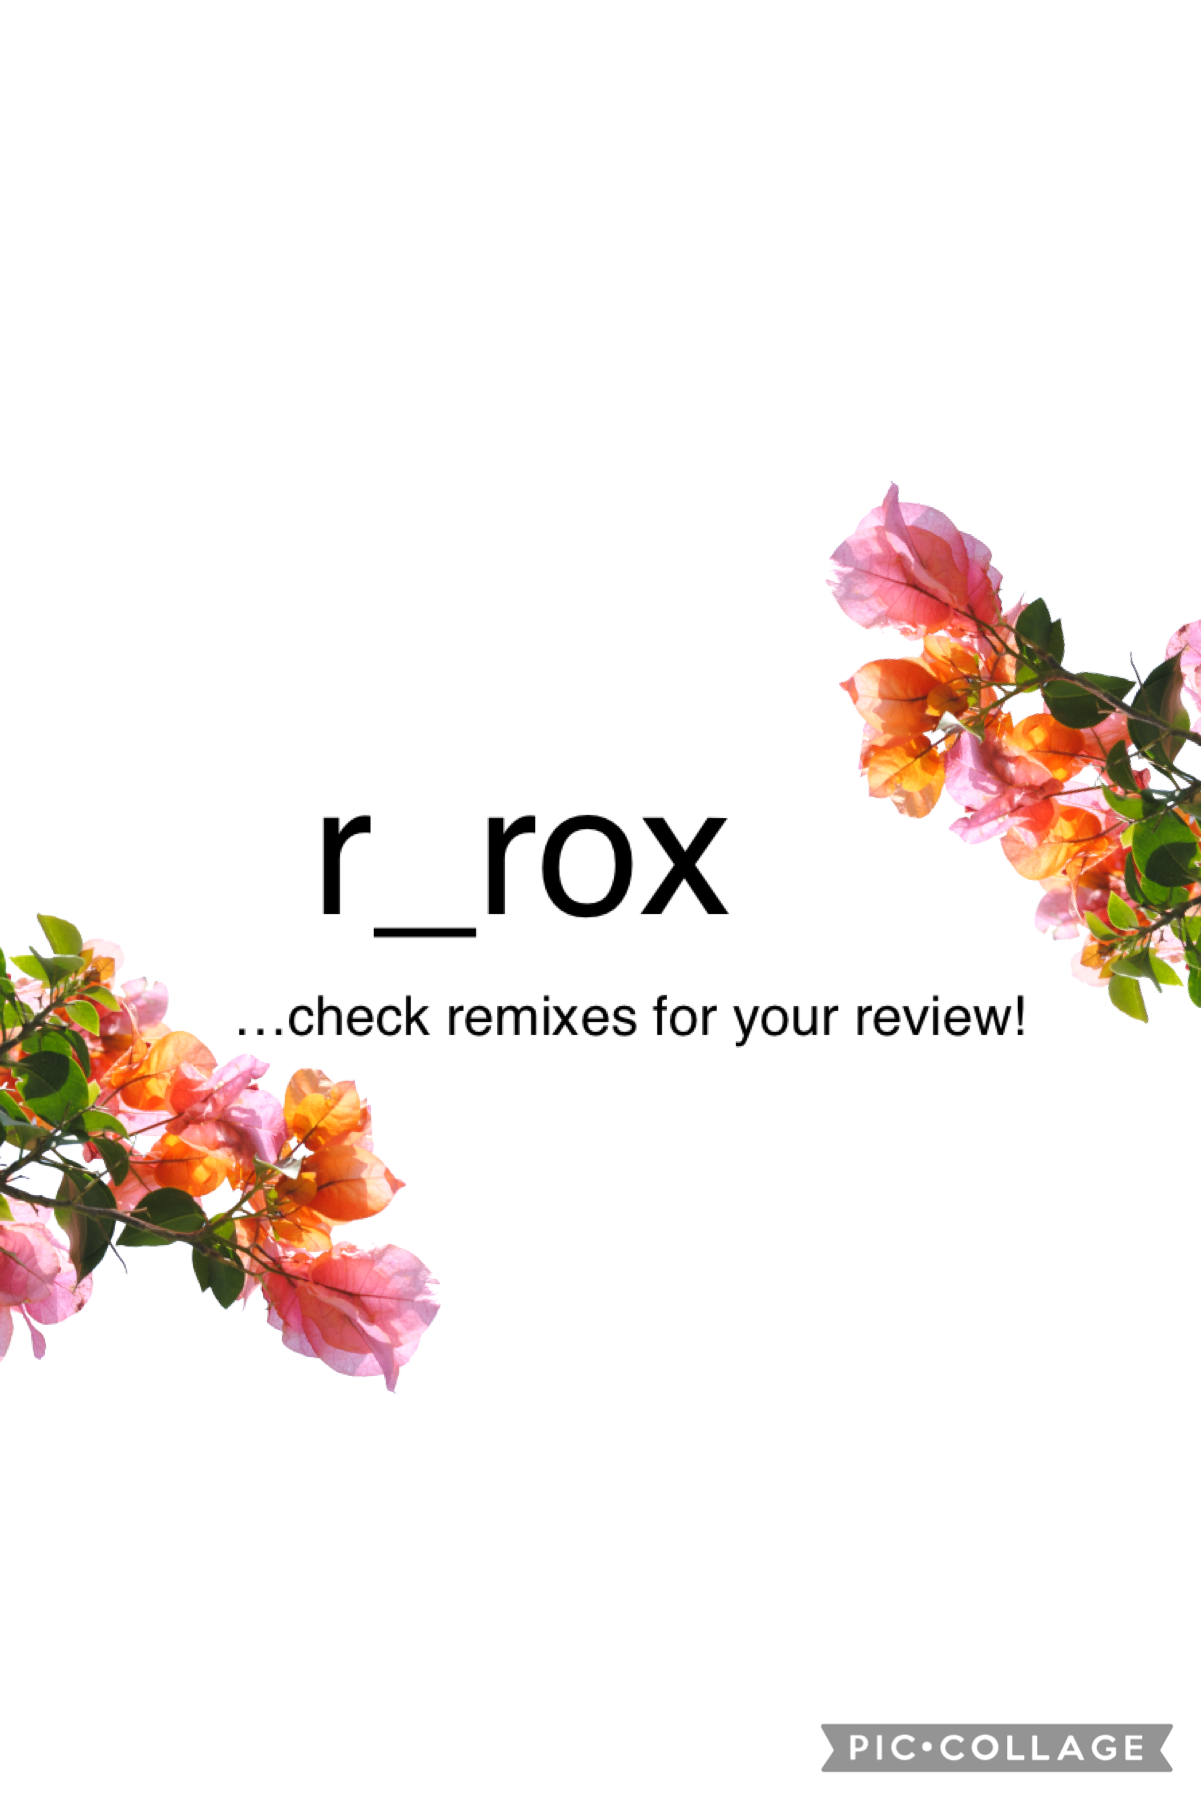 Check remixes for ur review!